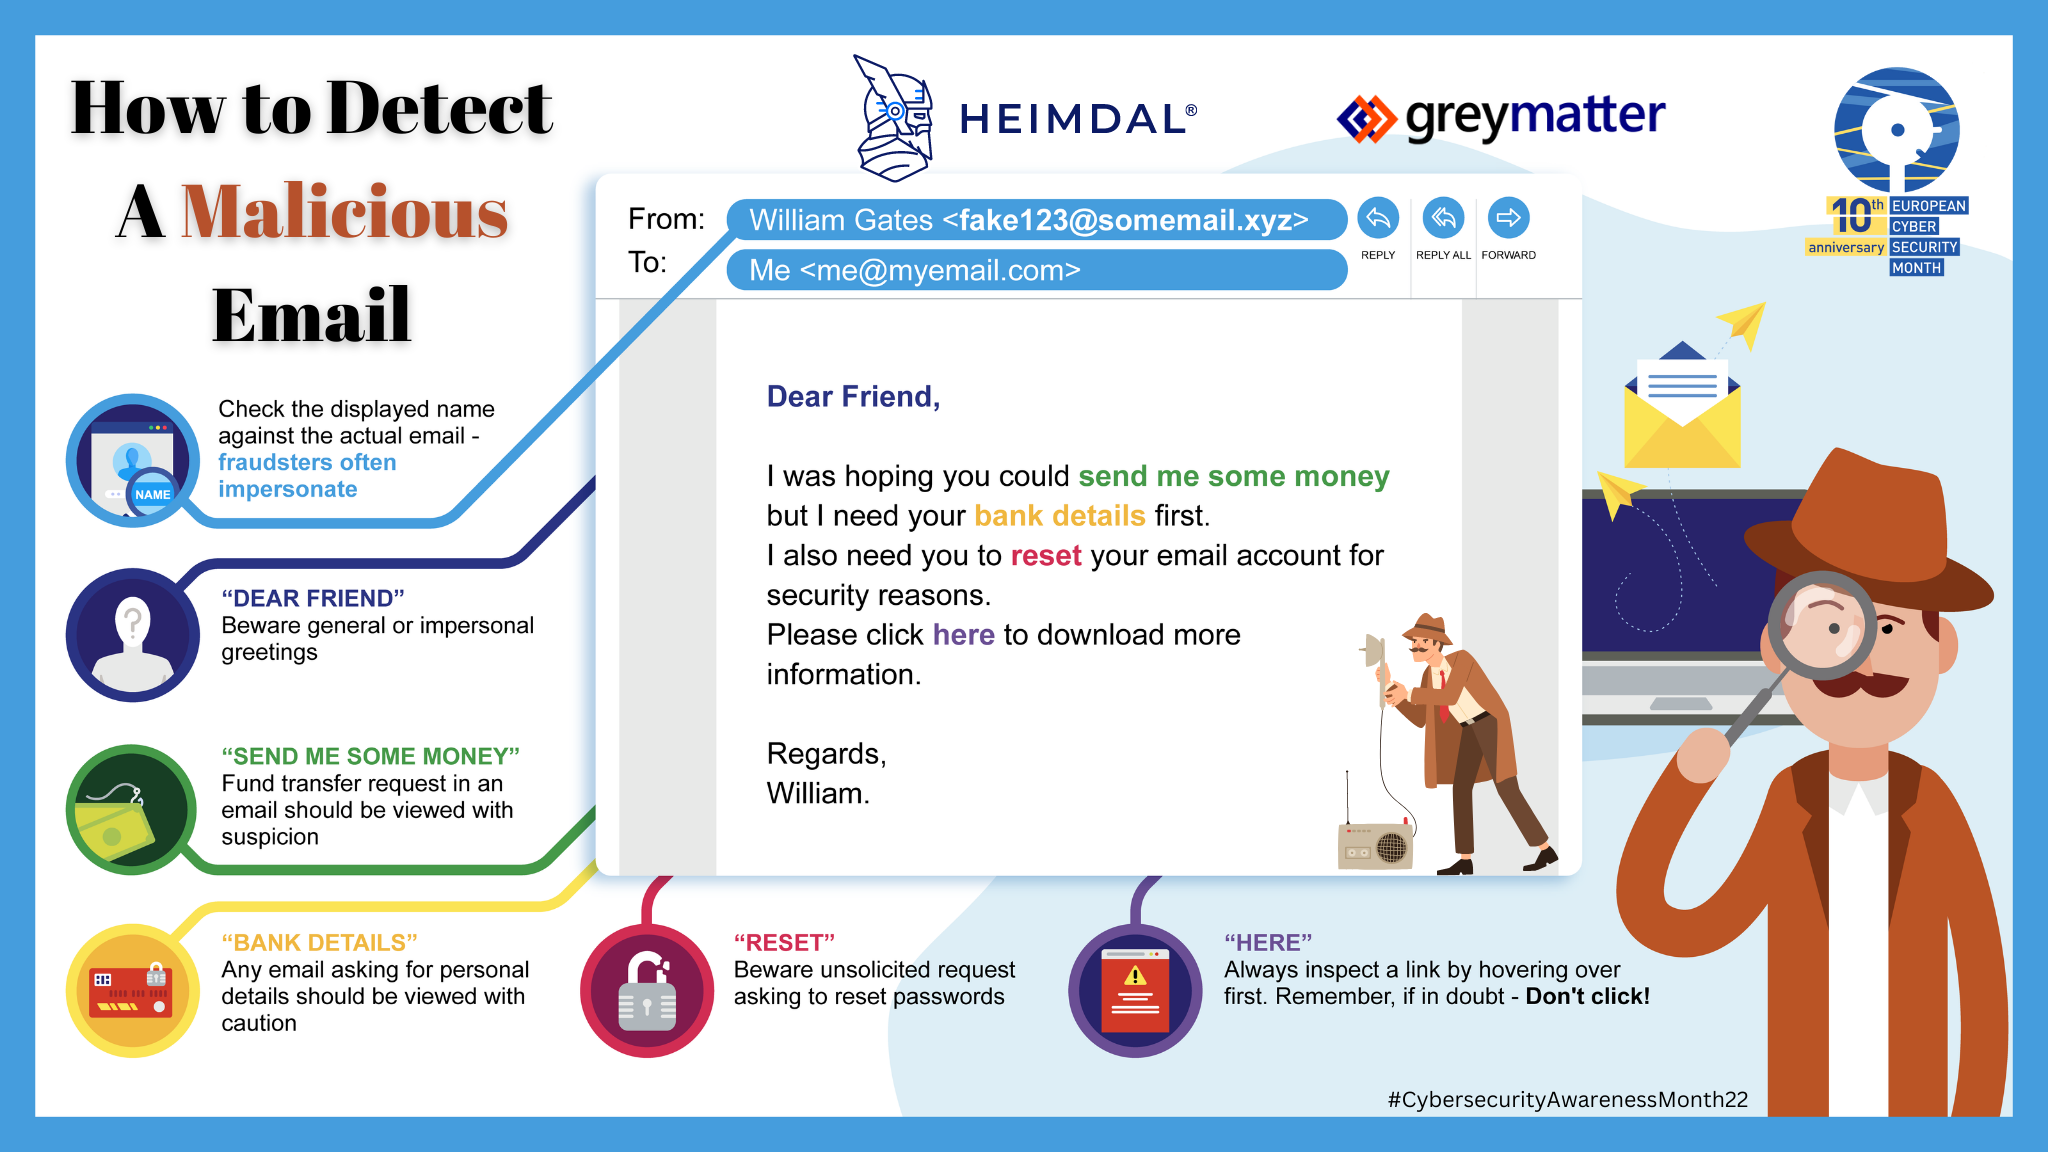 heimdal malicious email check